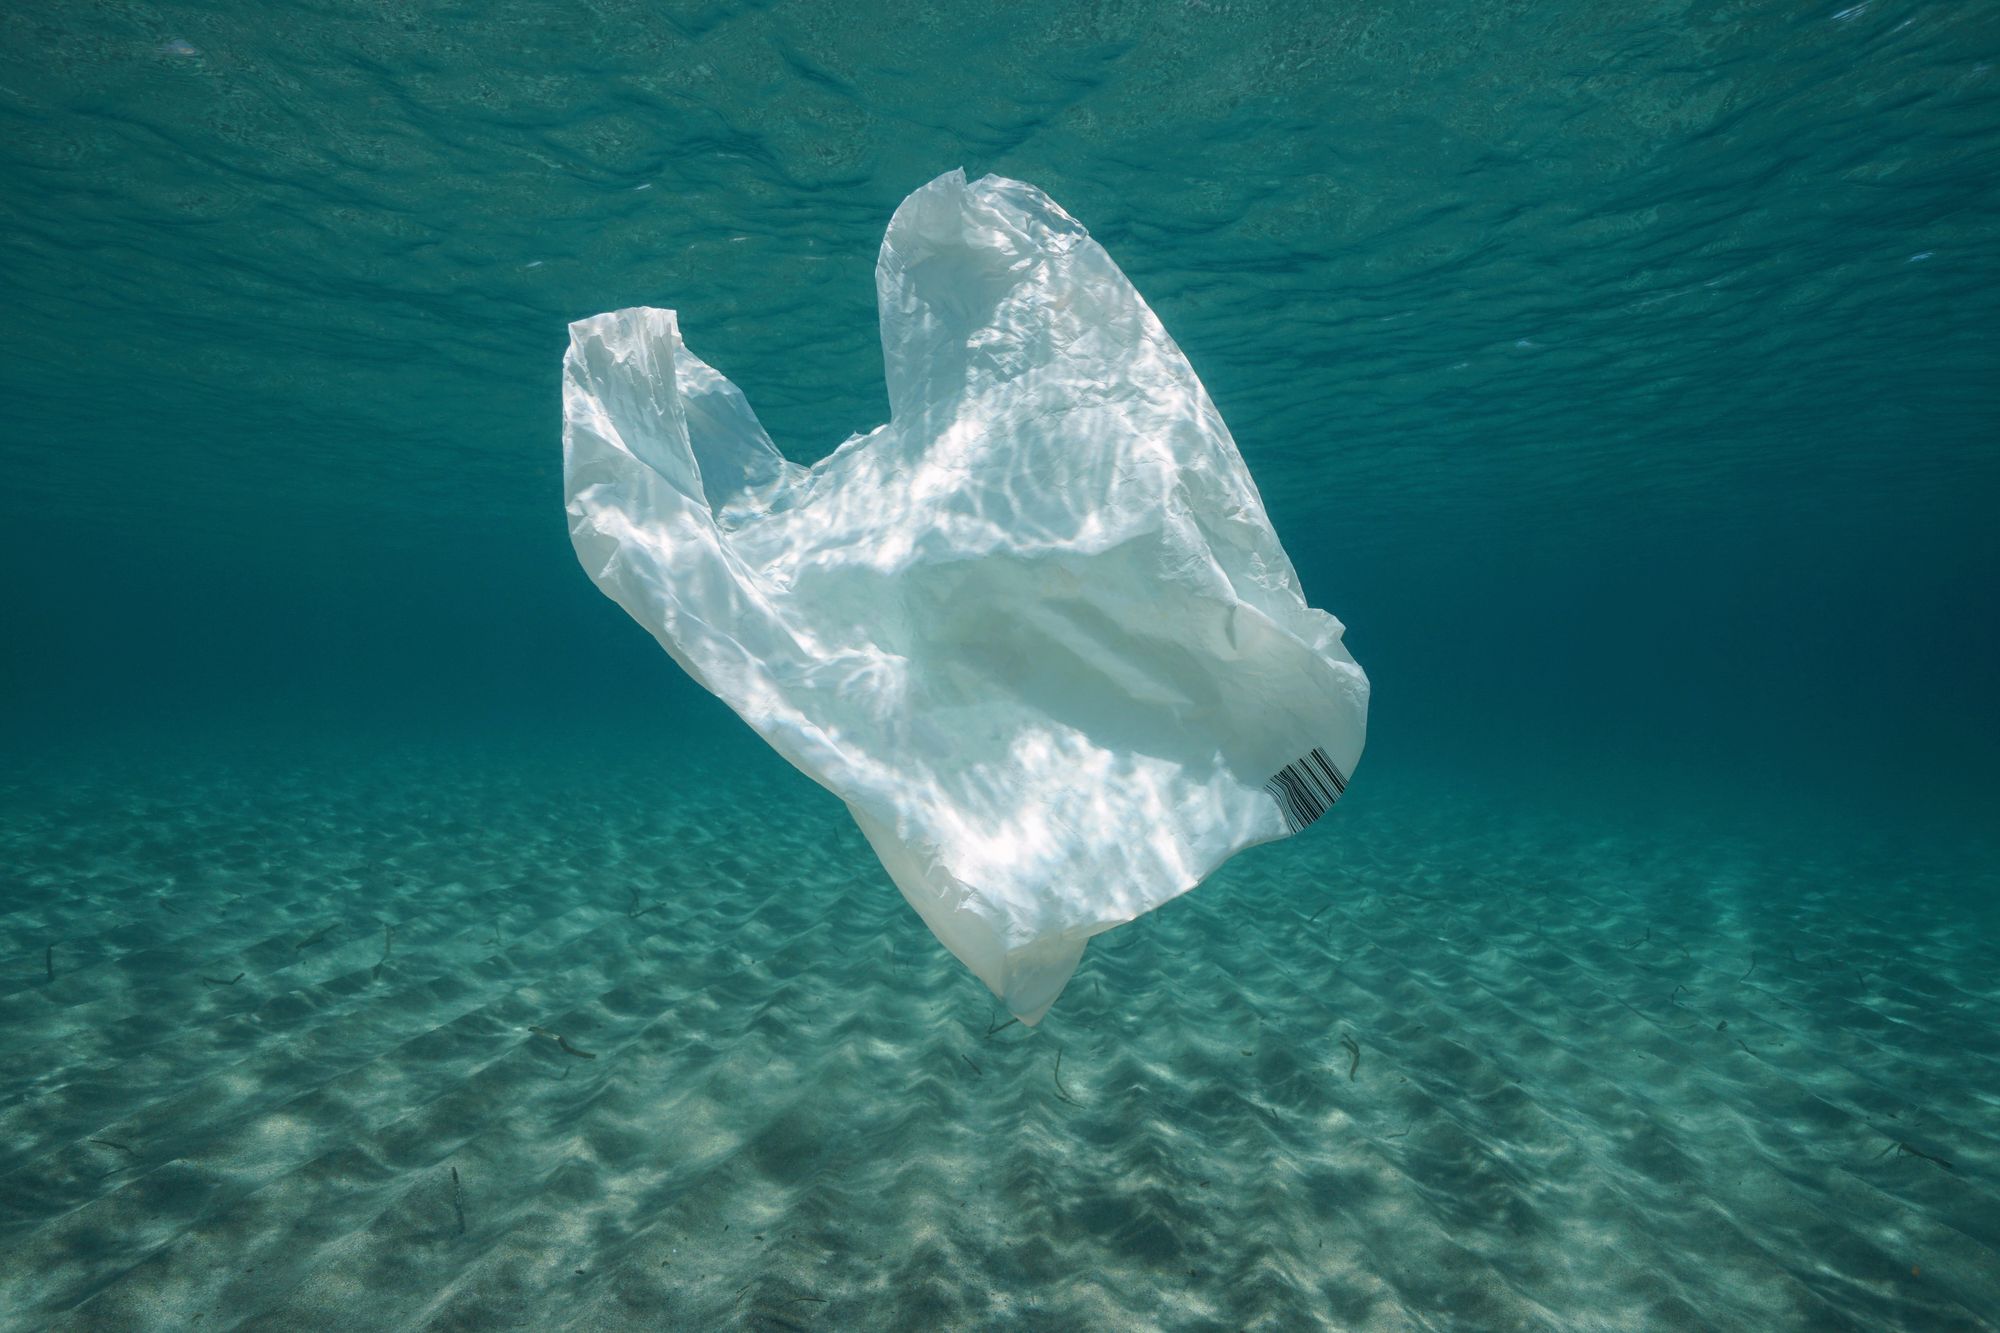 Plastic Recycling Facts — The truth about recycling plastic bags - RTS